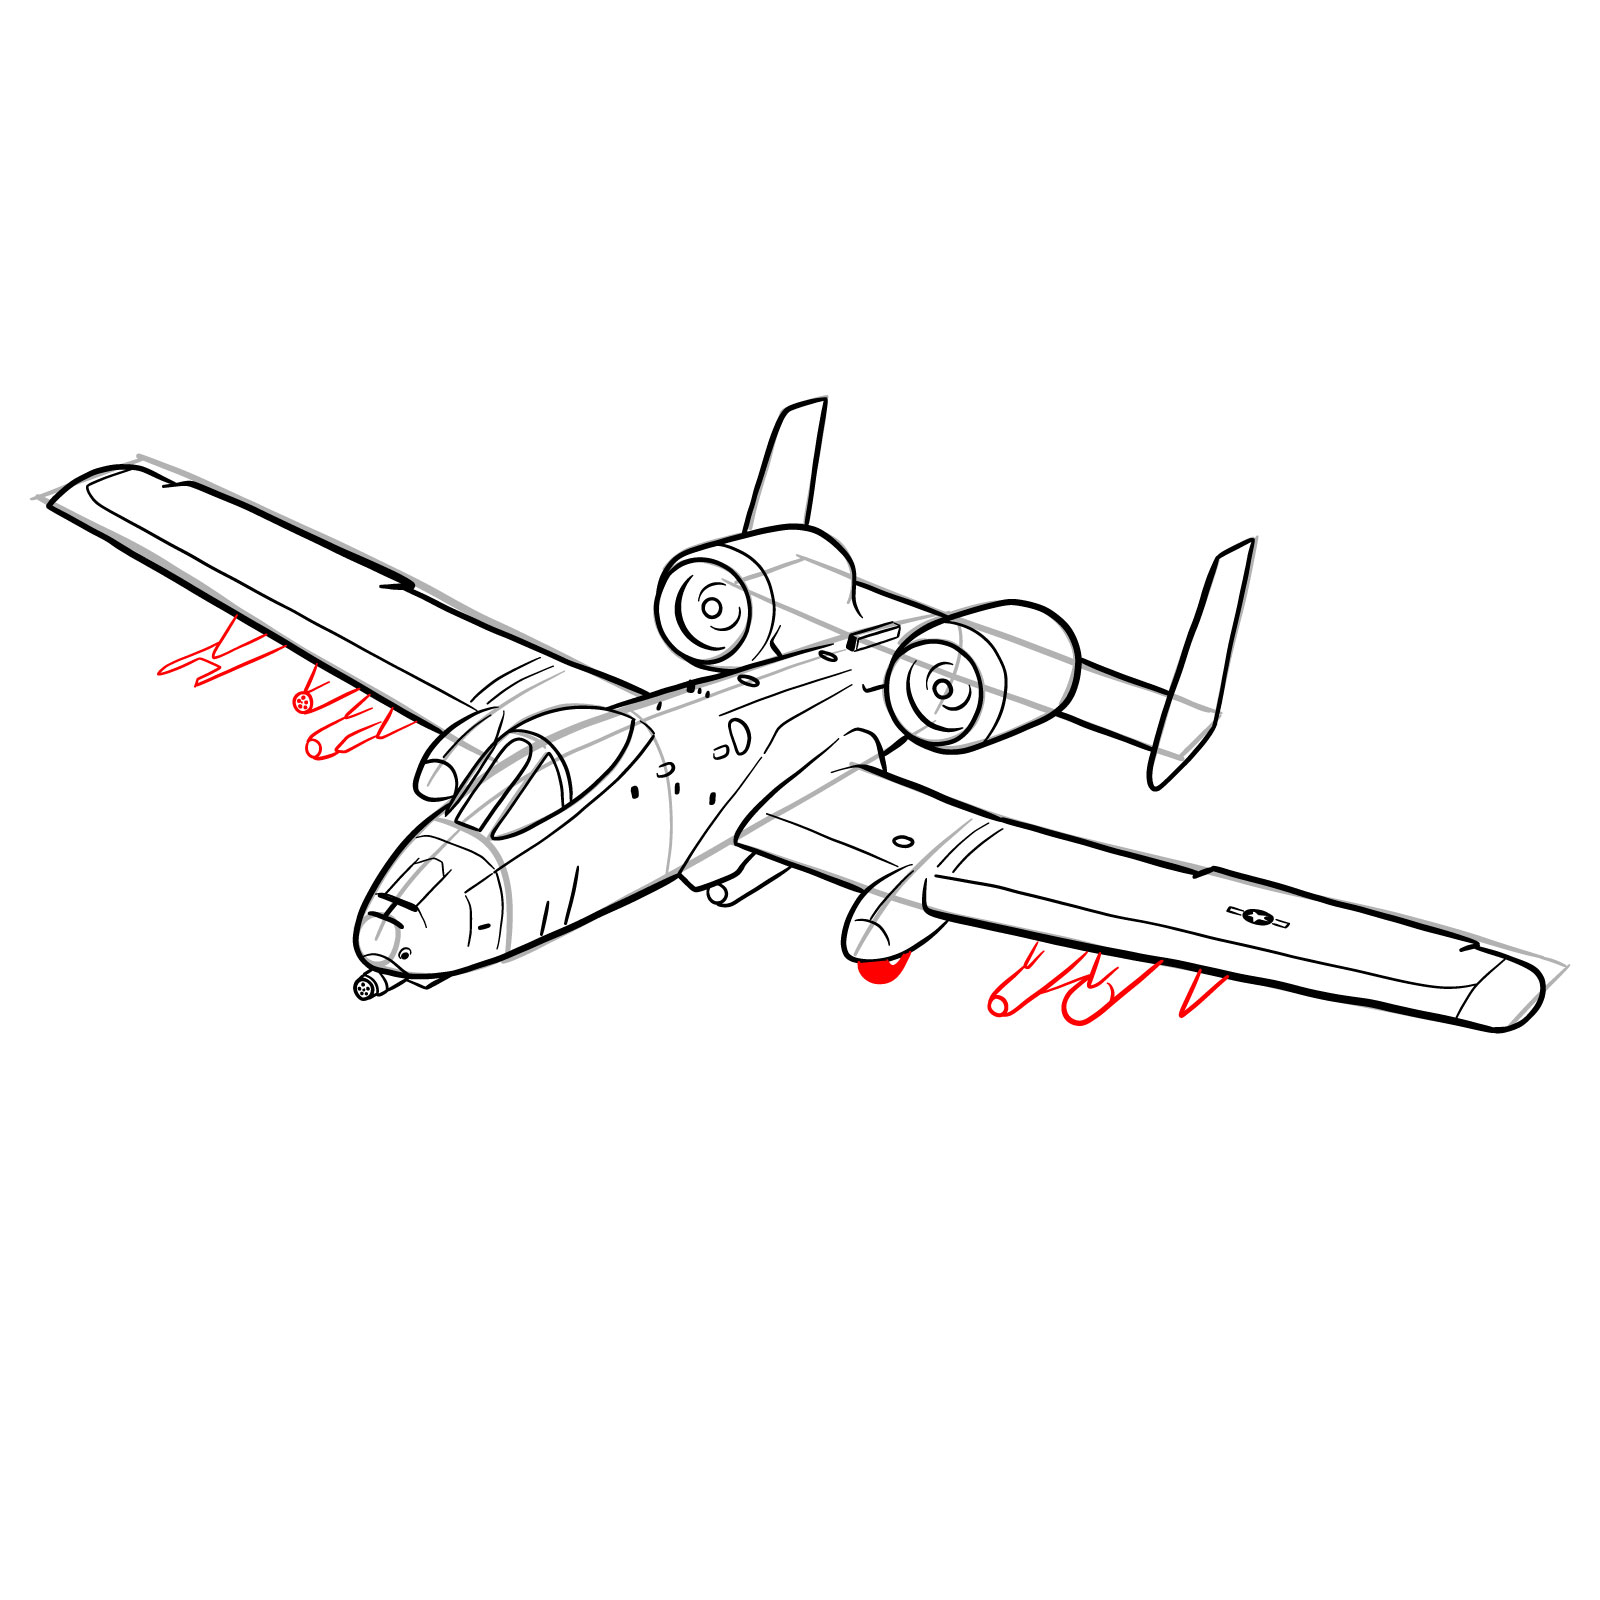 How to draw A-10 Thunderbolt II - step 29